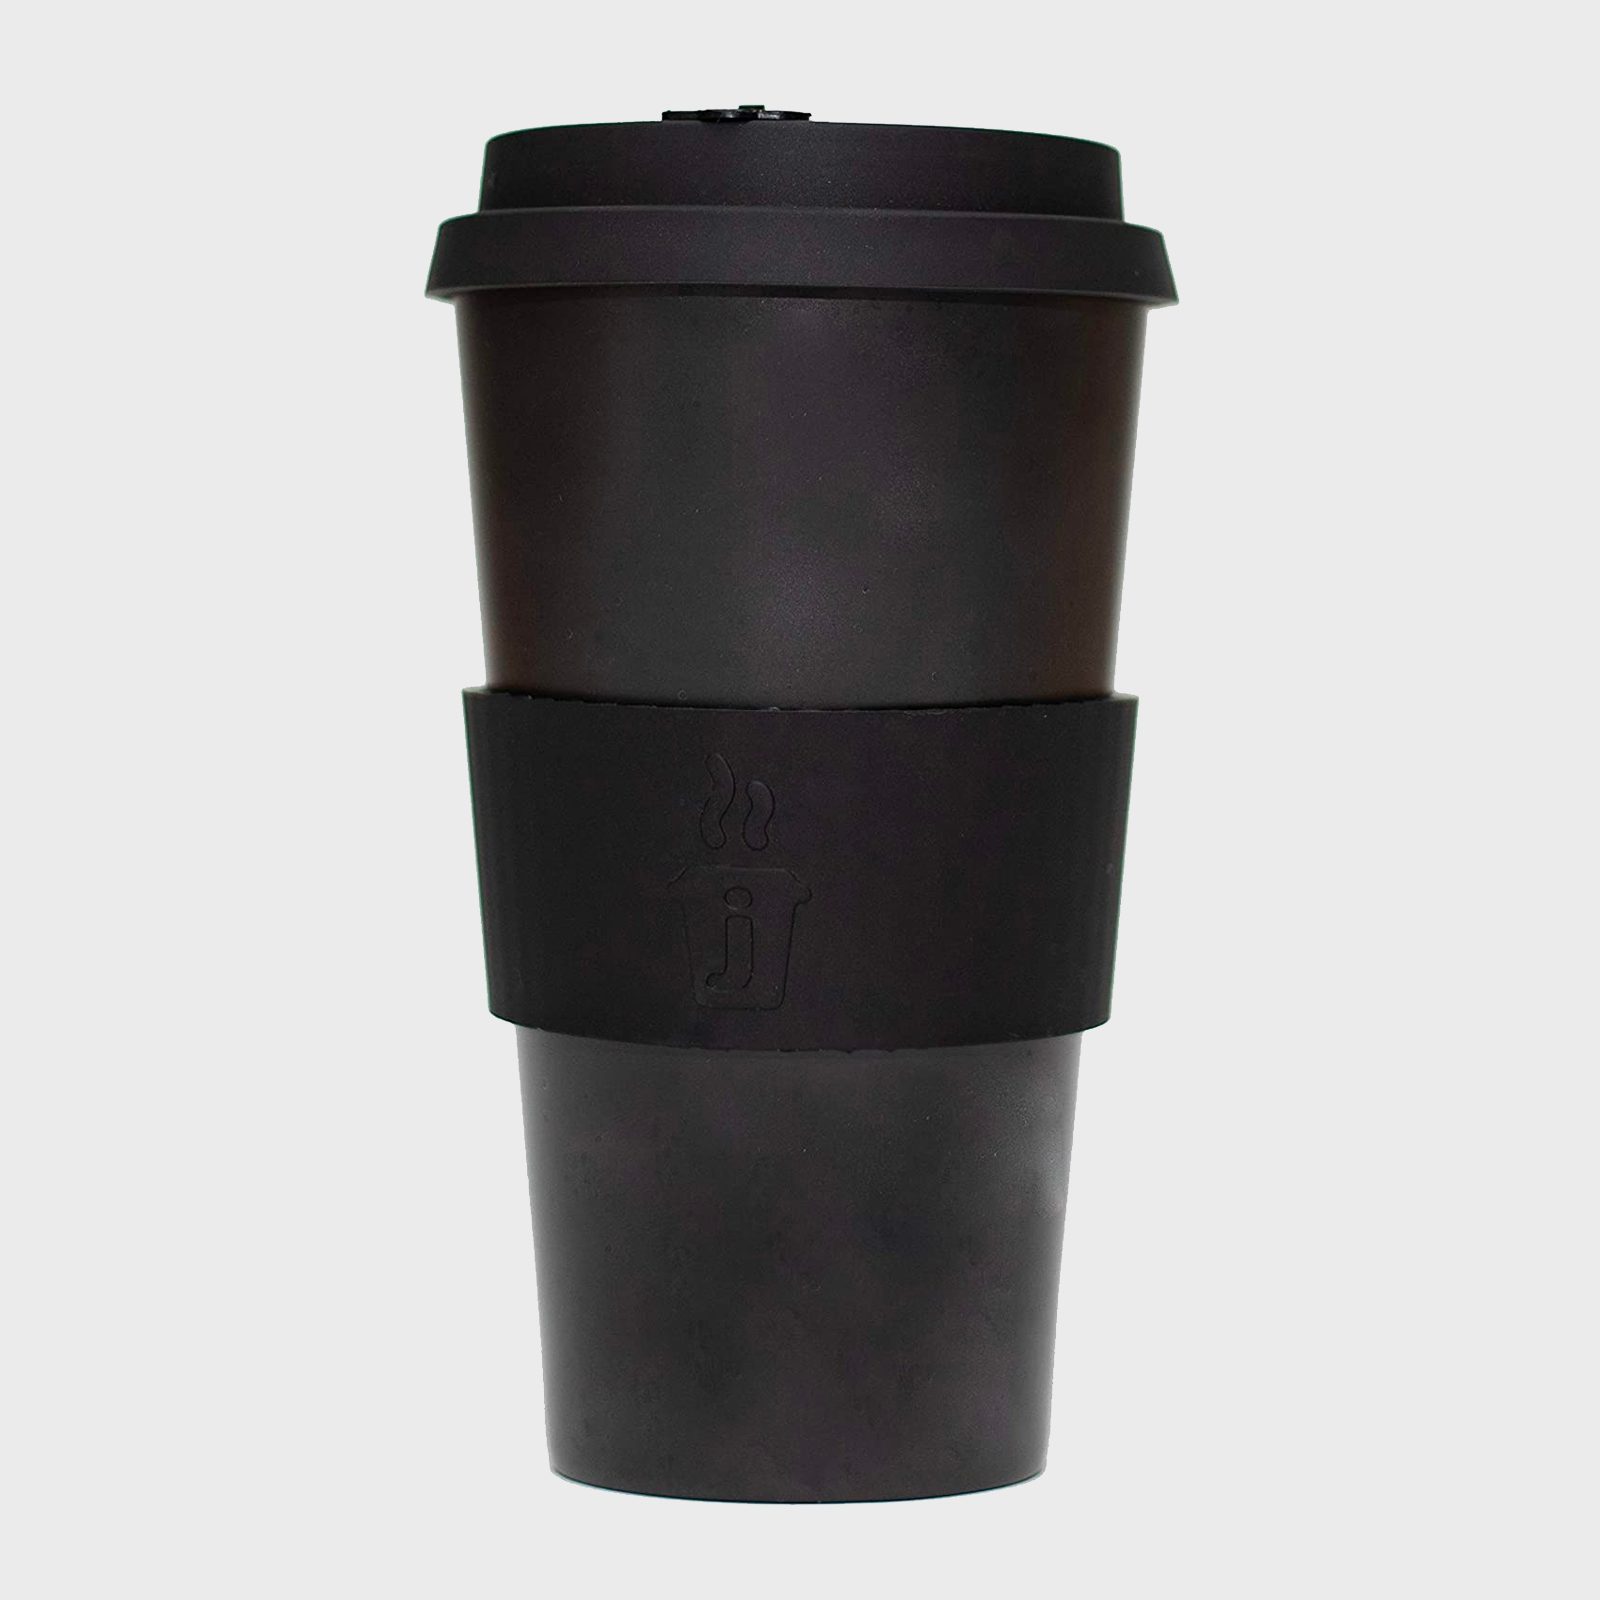 15 Best Reusable Coffee Cup Options for an Eco-Friendly Life